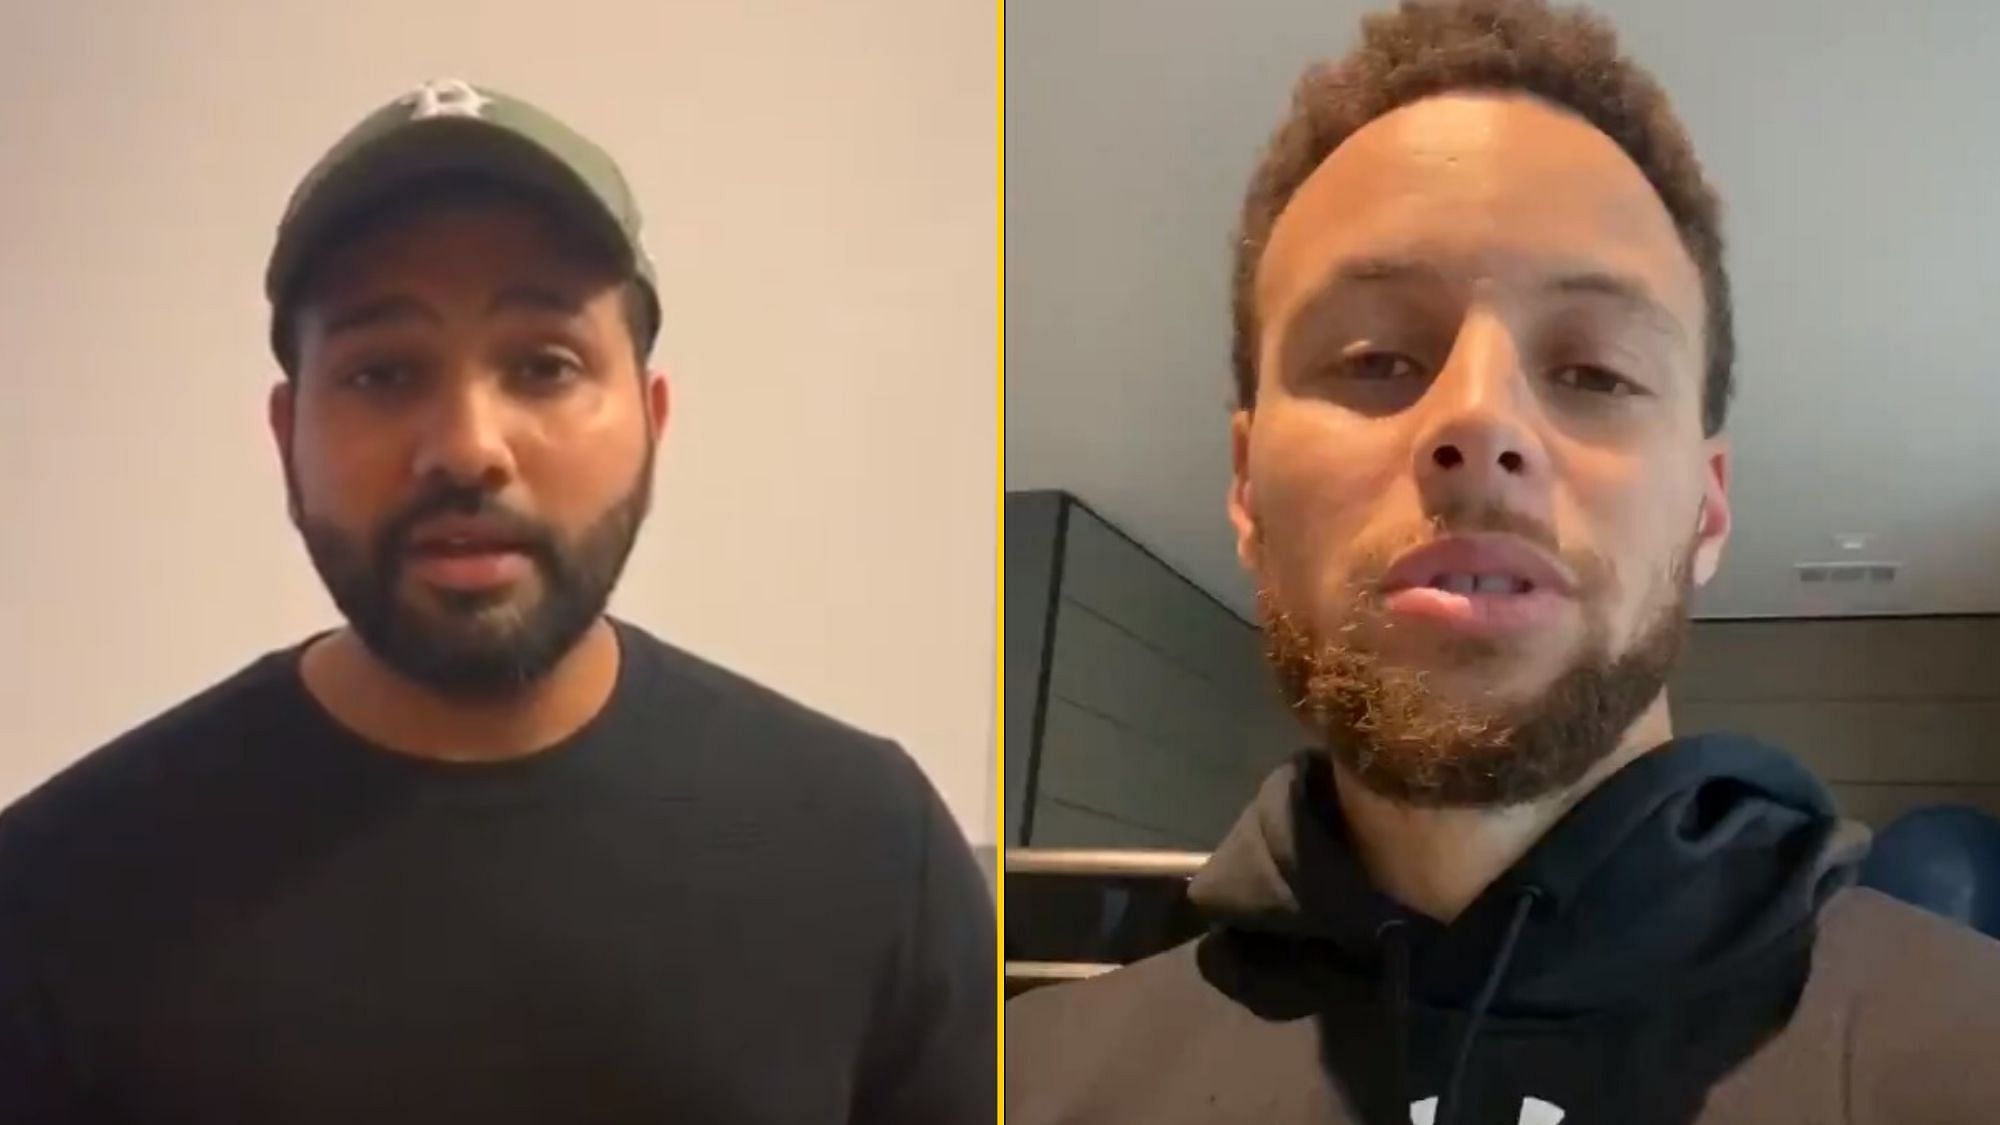 Both Rohit Sharma and Stephen Curry took to Twitter to share an awareness message amid the coronavirus pandemic.